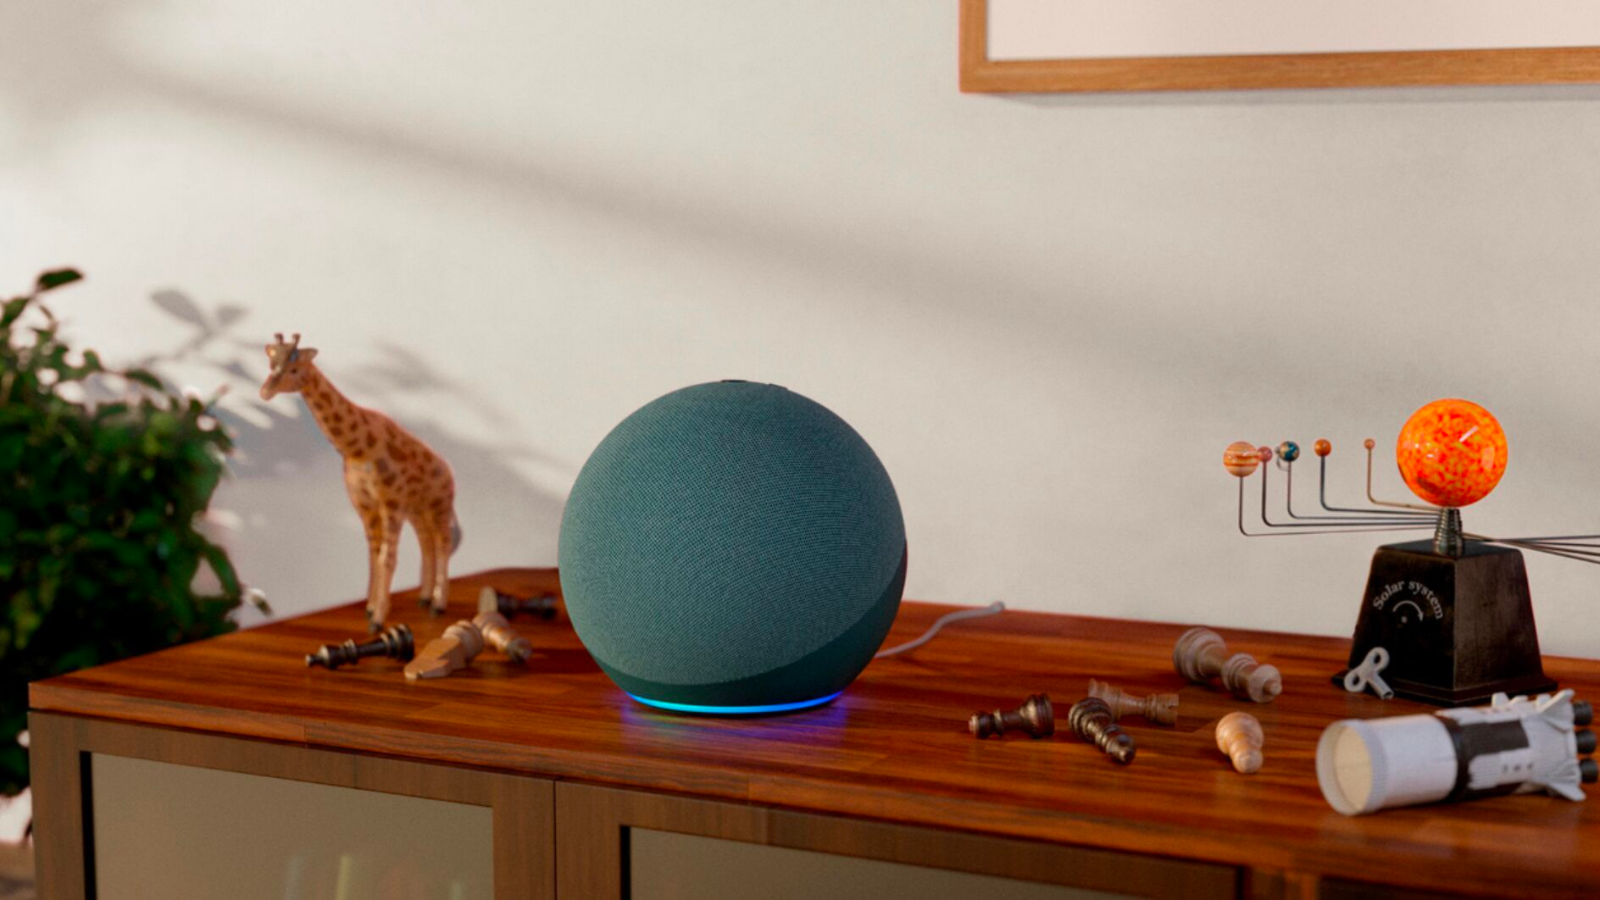 a twilight blue amazon echo on a wooden console next to a plastic giraffe toy and a model solar system